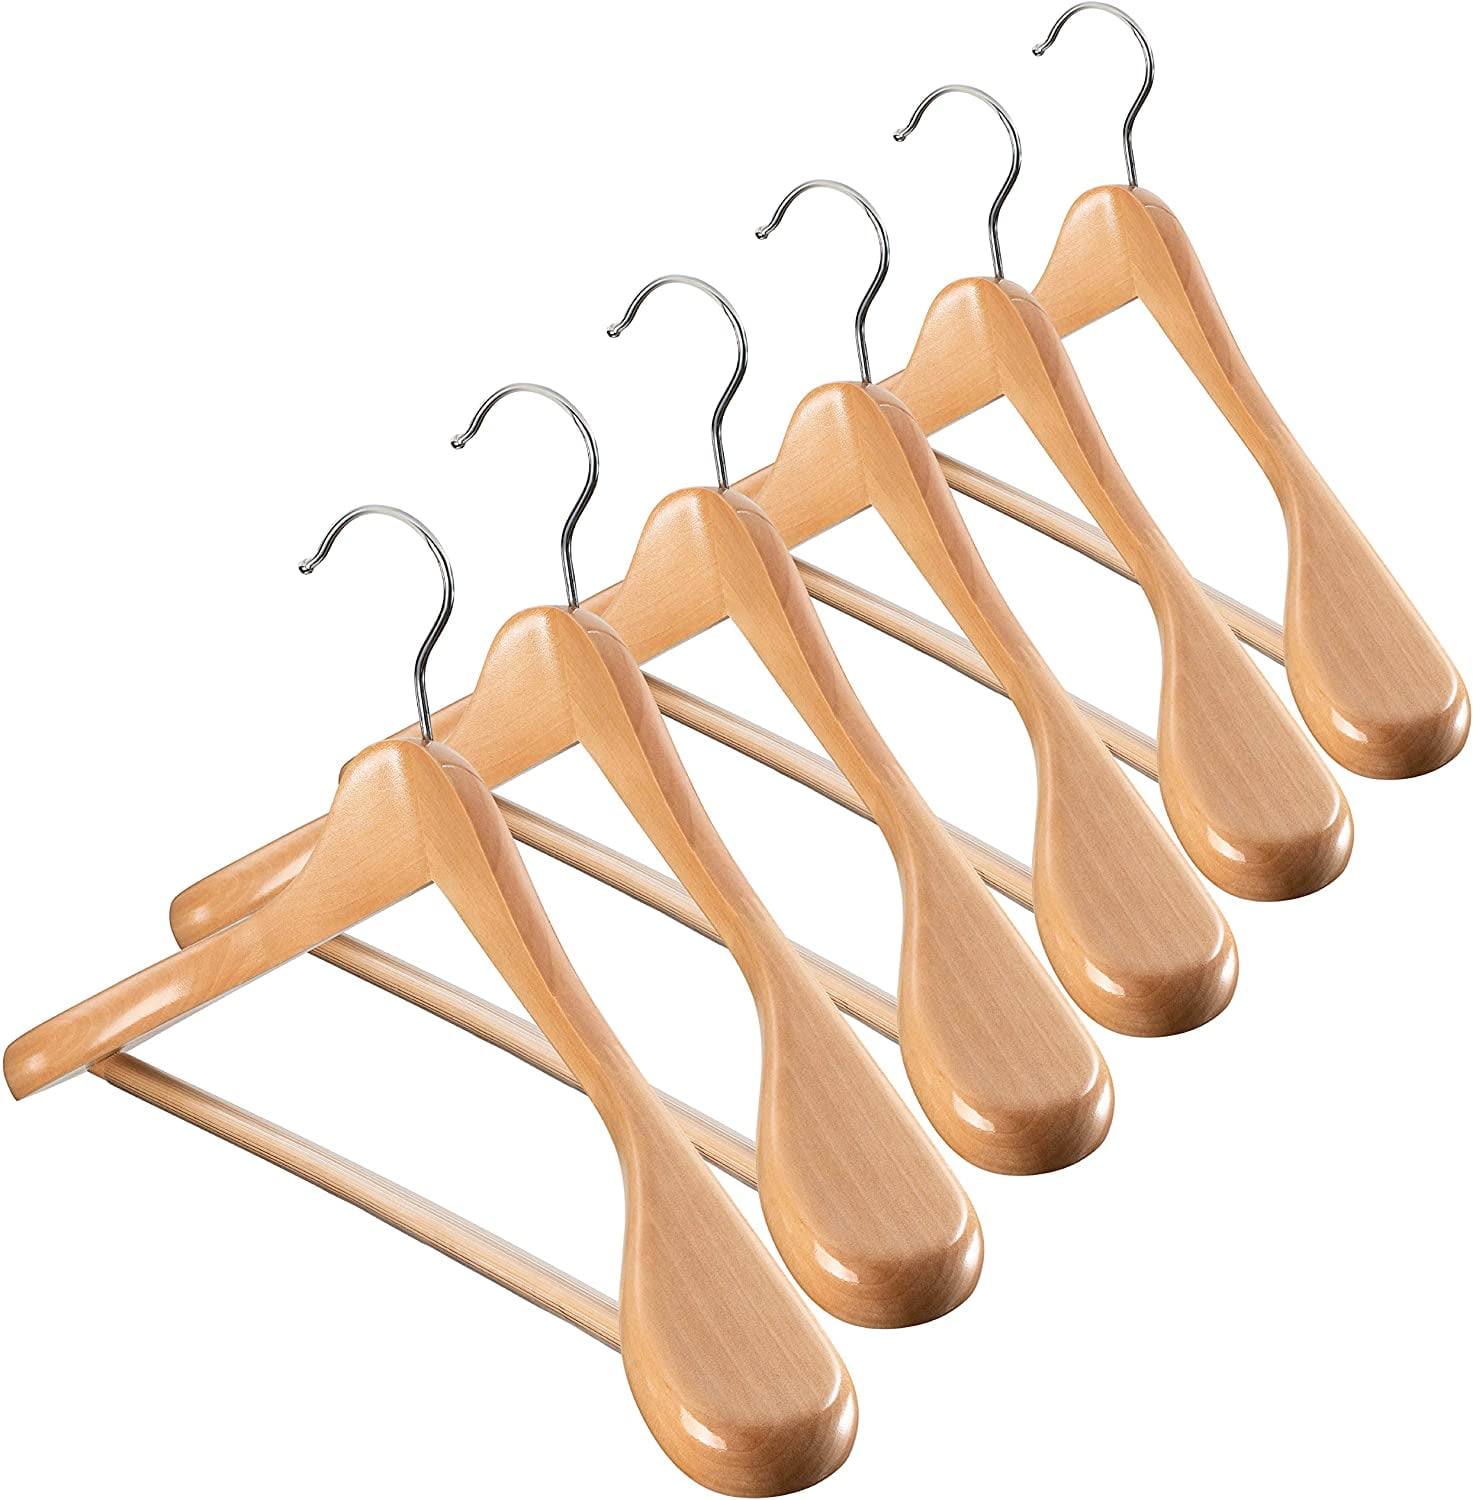  Nature-Smile Luxury Mahogany Wooden Suit Hangers - 6 Pack -  Wood Coat Hangers,Jacket Outerwear Shirt Hangers,Glossy Finish with  Extra-Wide Shoulder, 360 Degree Swivel Hooks & Anti-Slip Bar with Screw :  Home